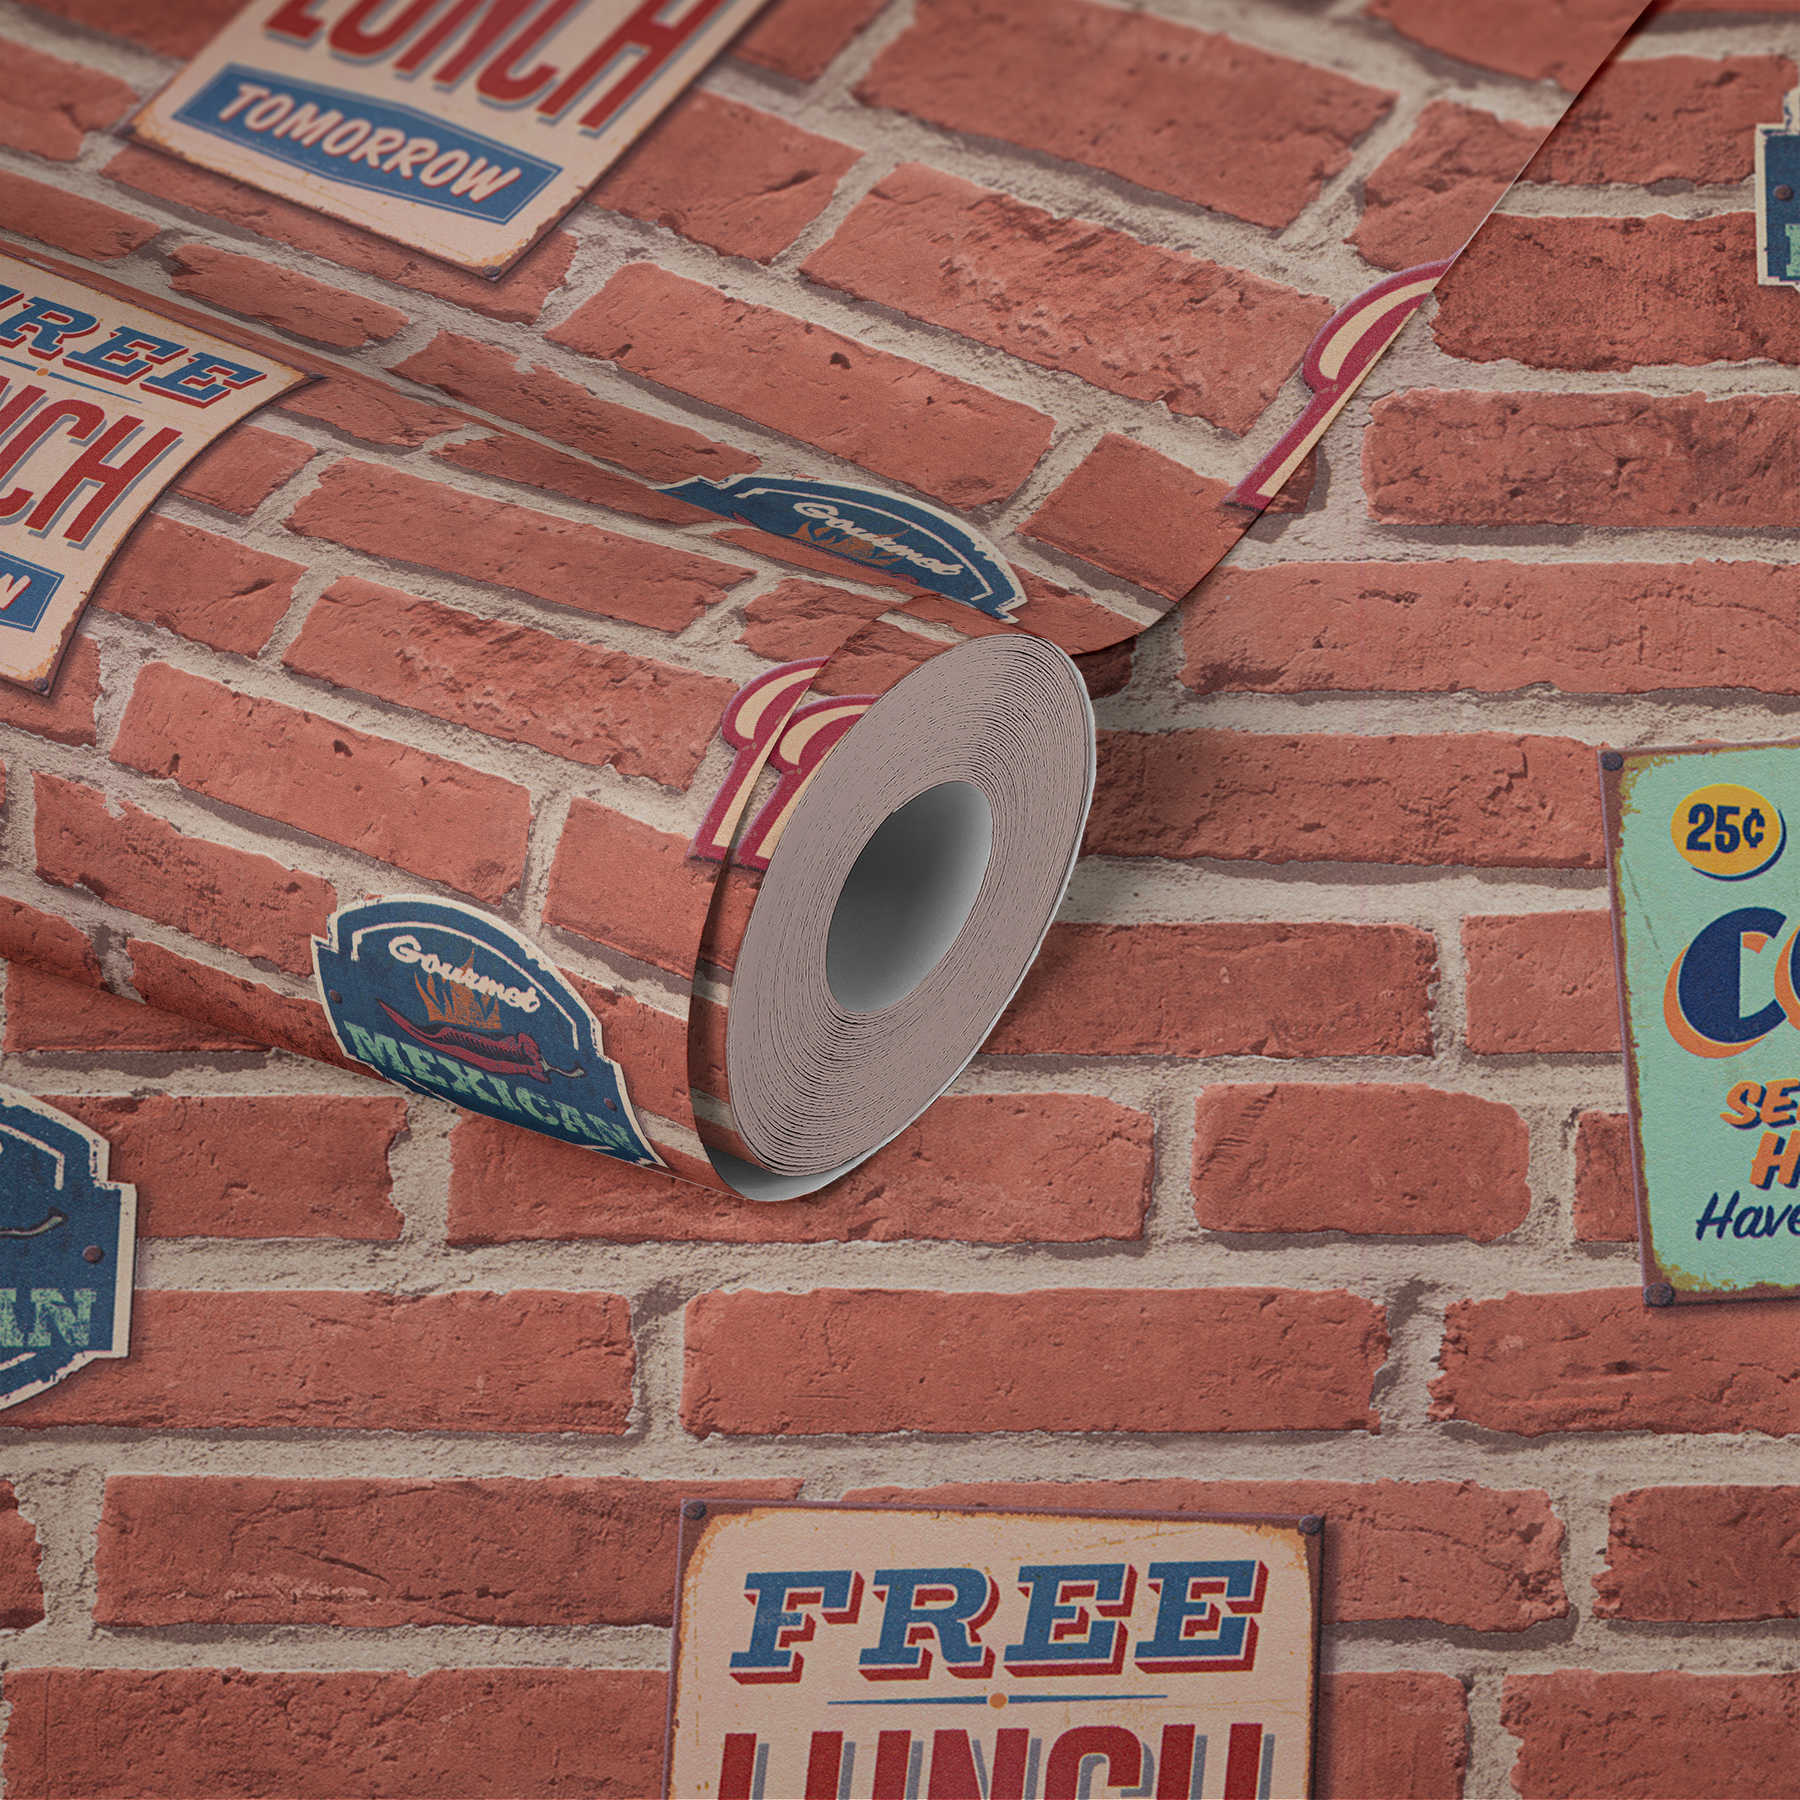             Stone wallpaper brick wall American Diner style - Colorful
        